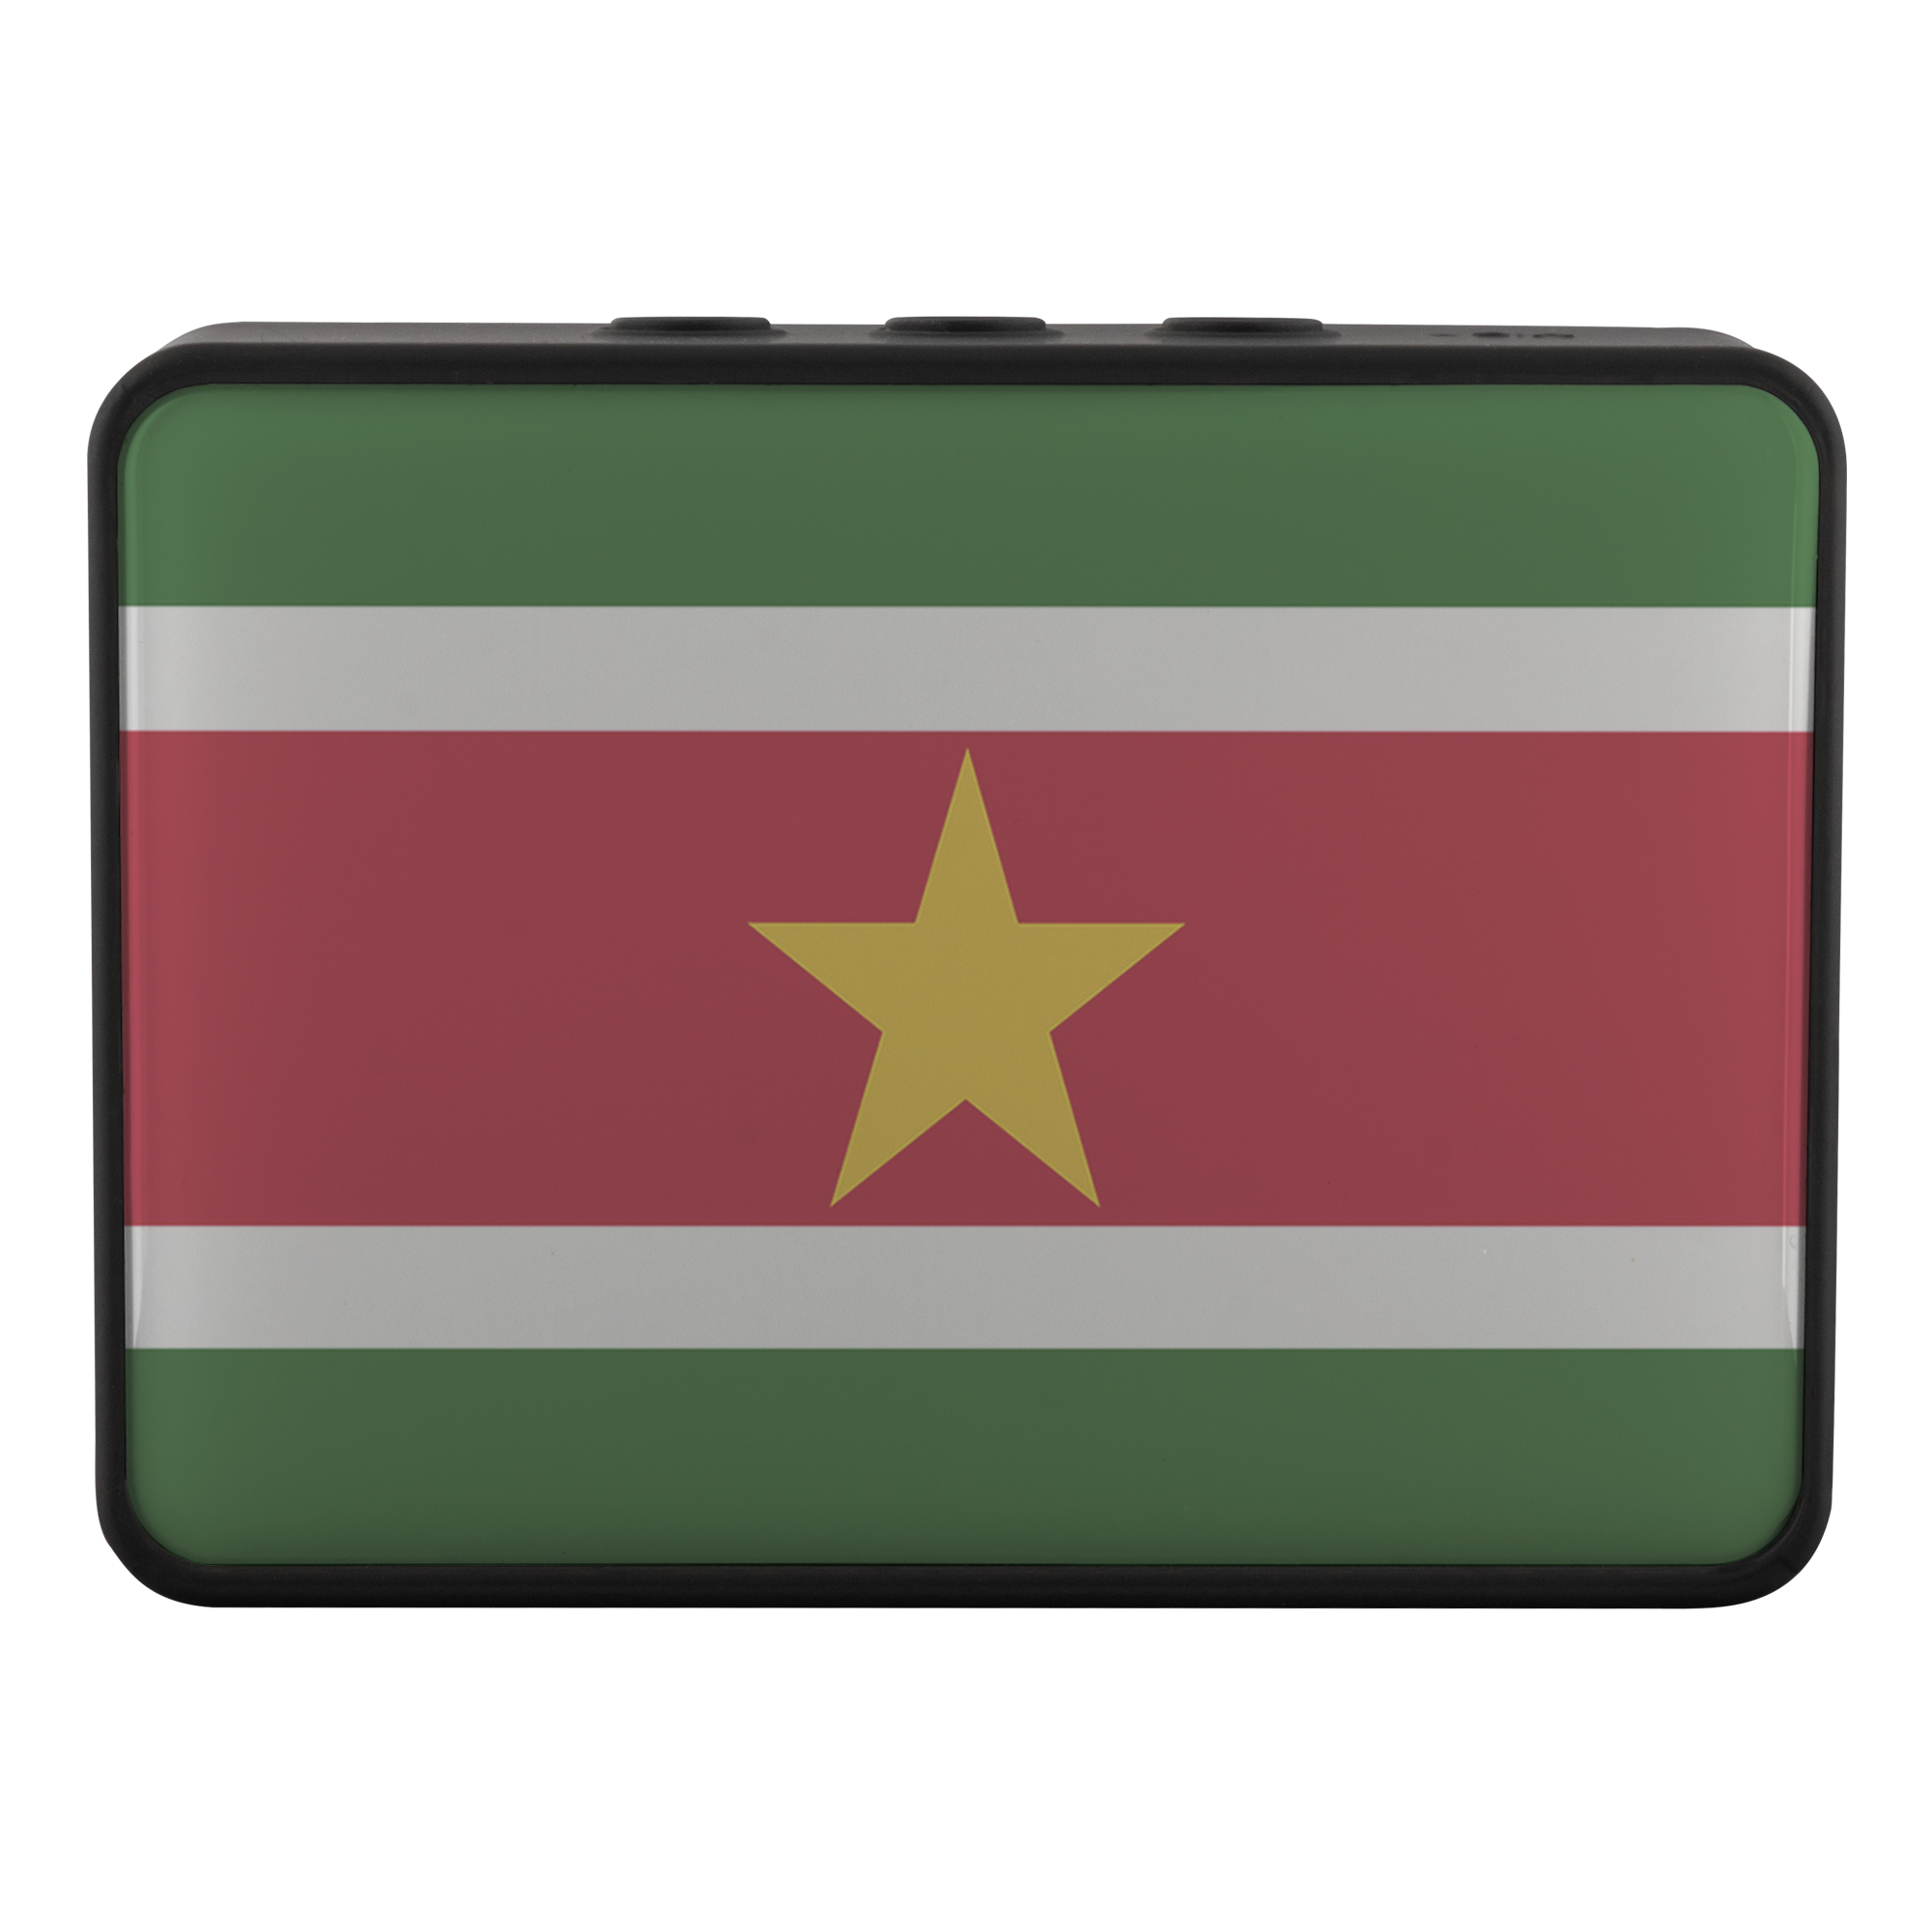 A Rectangular Object With A Flag